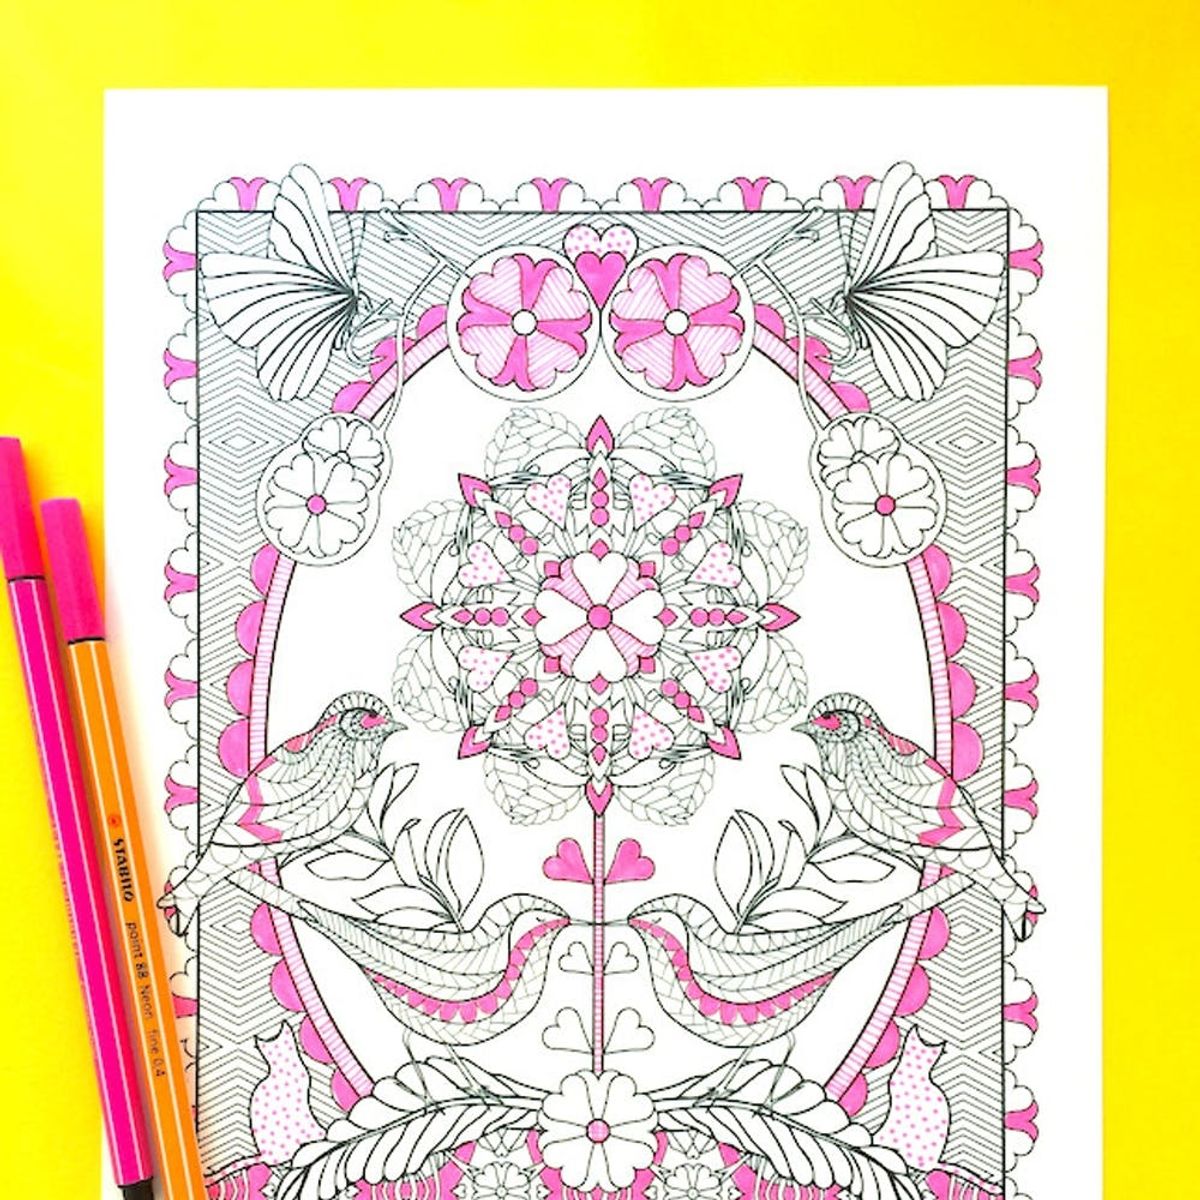 Take an Exclusive First Look at Adobe’s First Adult Coloring Book